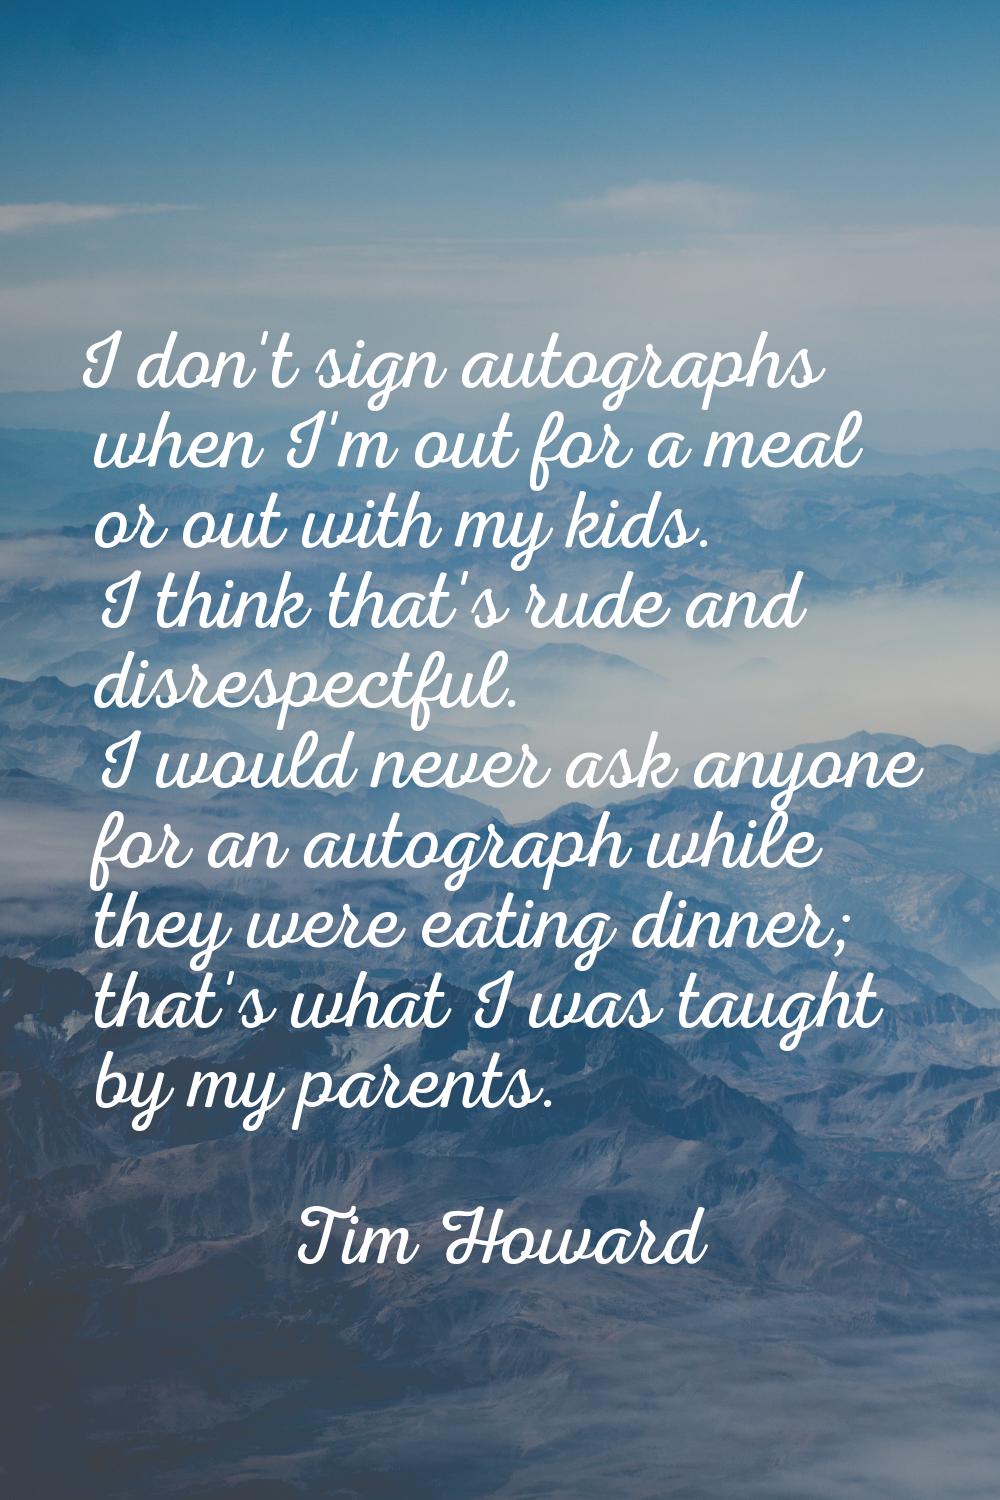 I don't sign autographs when I'm out for a meal or out with my kids. I think that's rude and disres